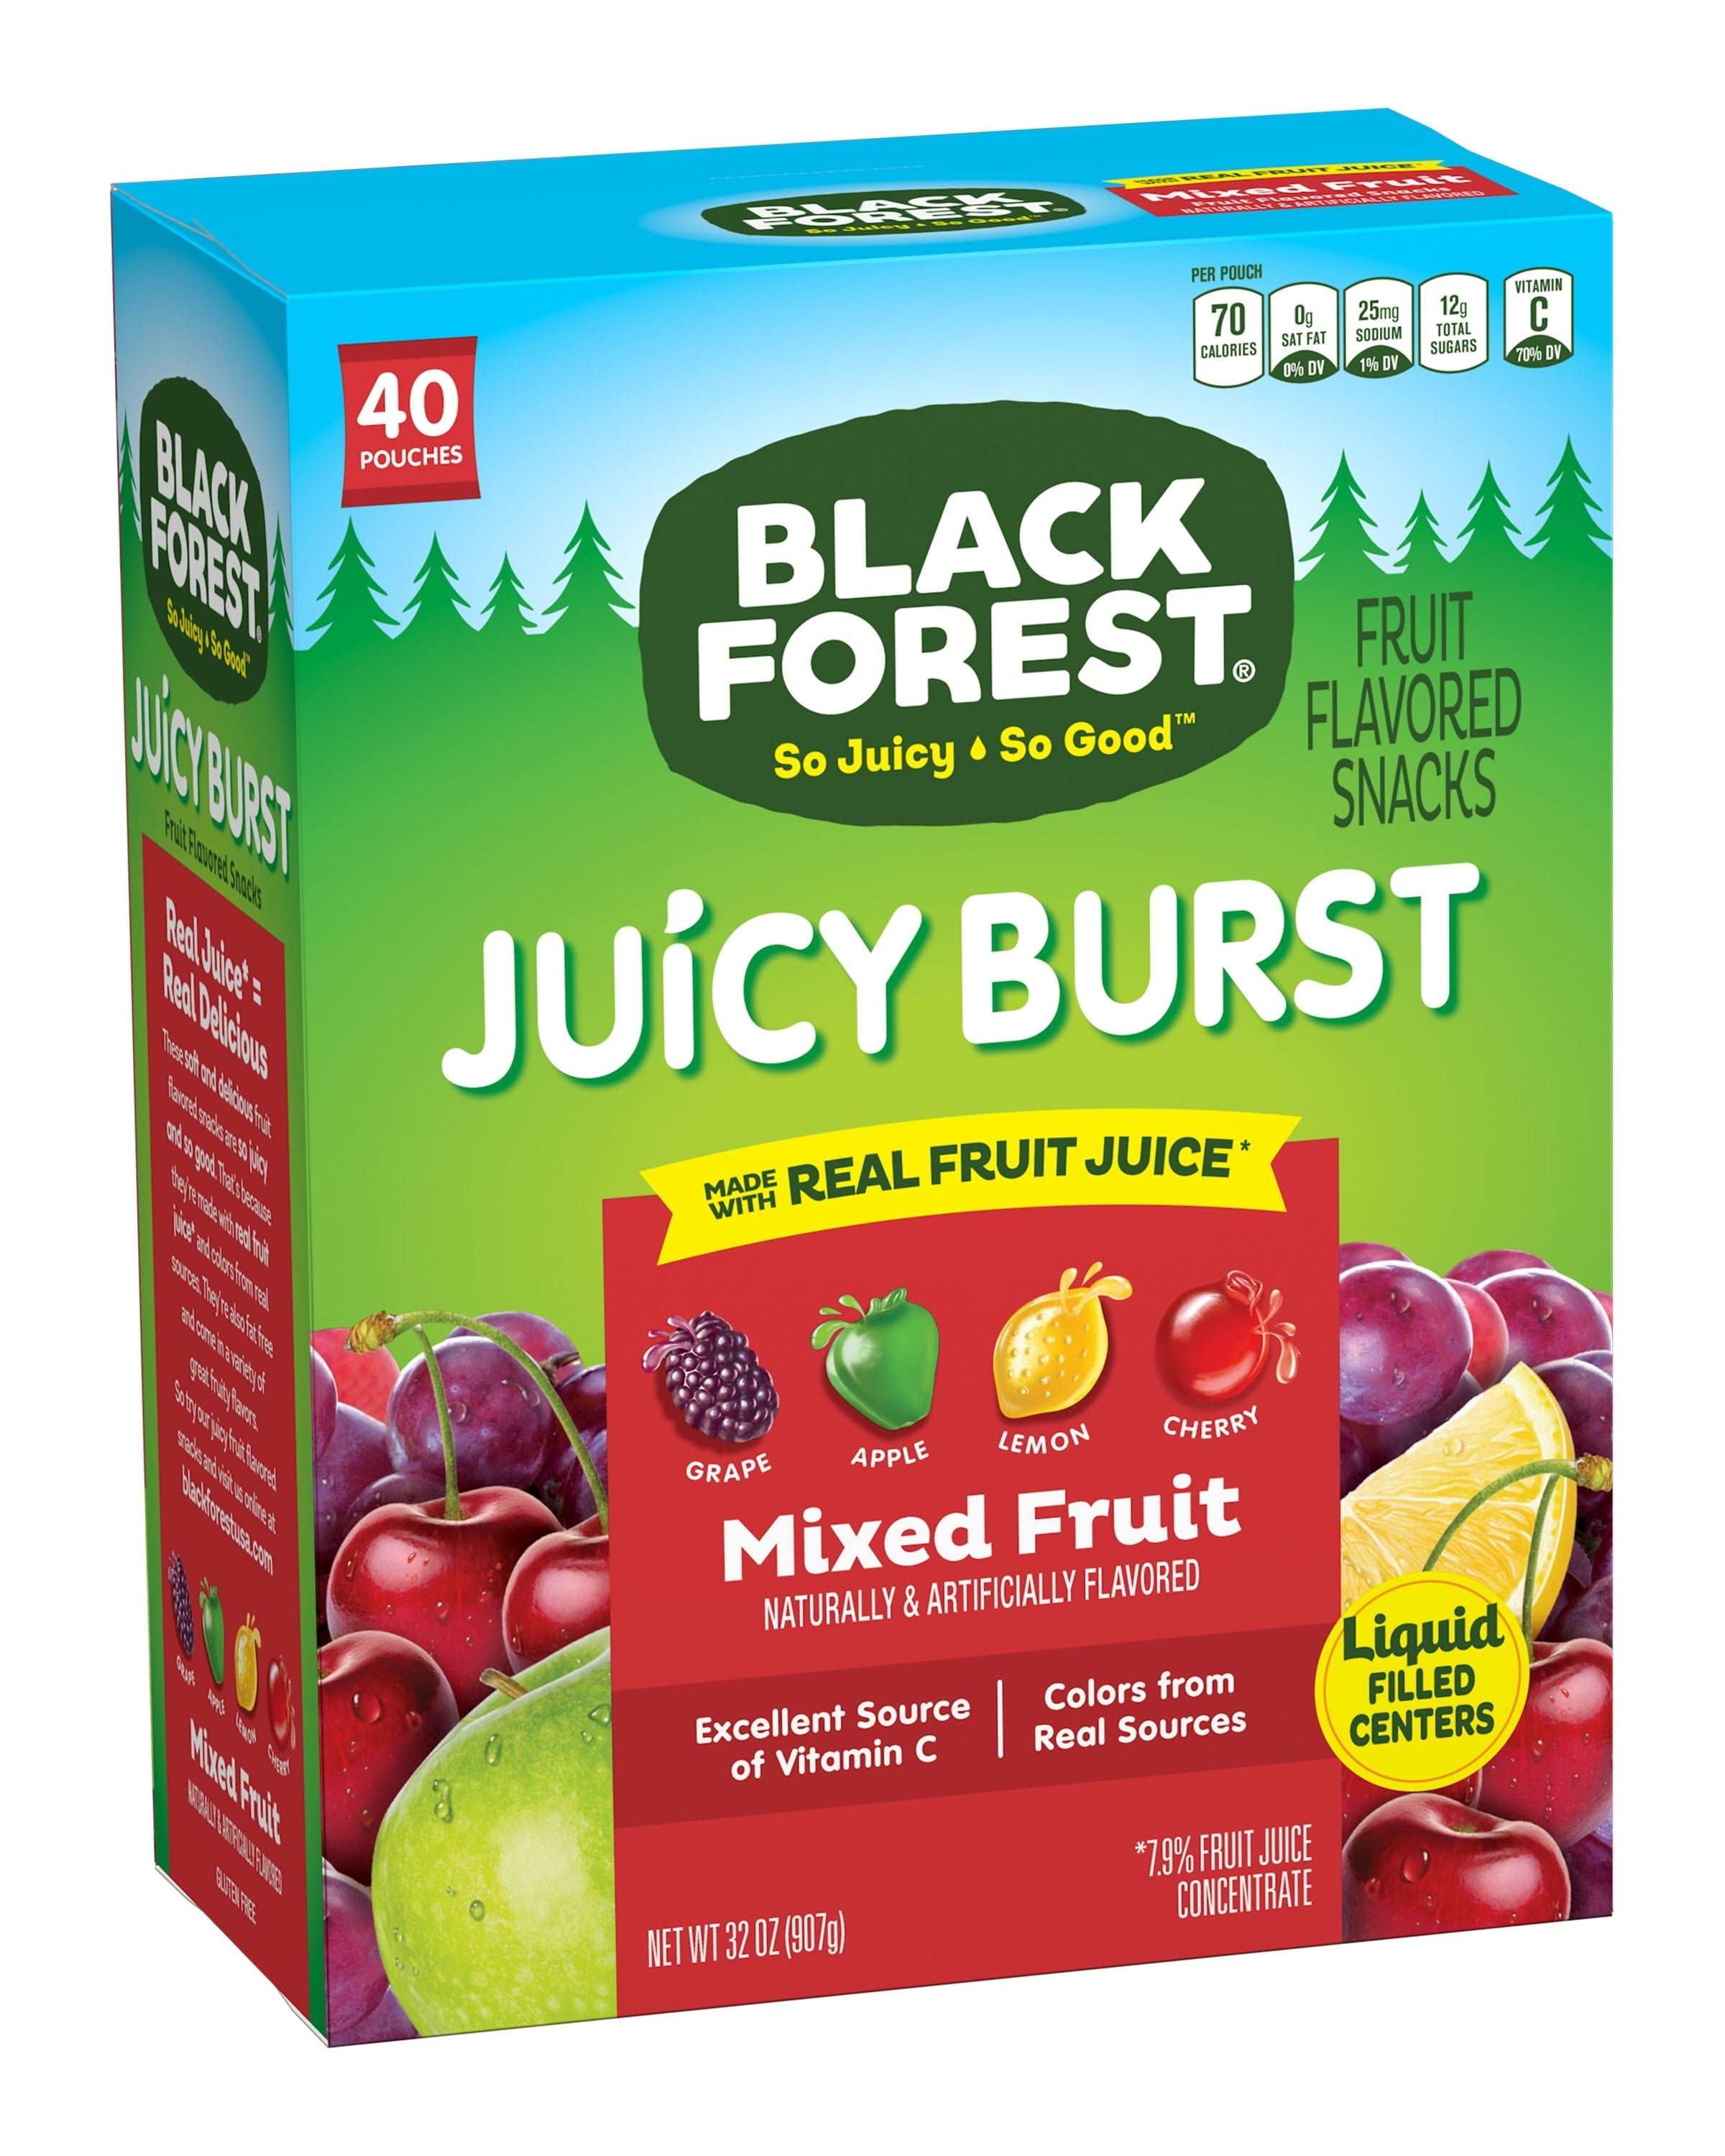 Wholesale prices with free shipping all over United States Black Forest Fruit Flavored Snacks Juicy Burst, Mixed Fruit, 32 oz Box, 40 Ct - Steven Deals